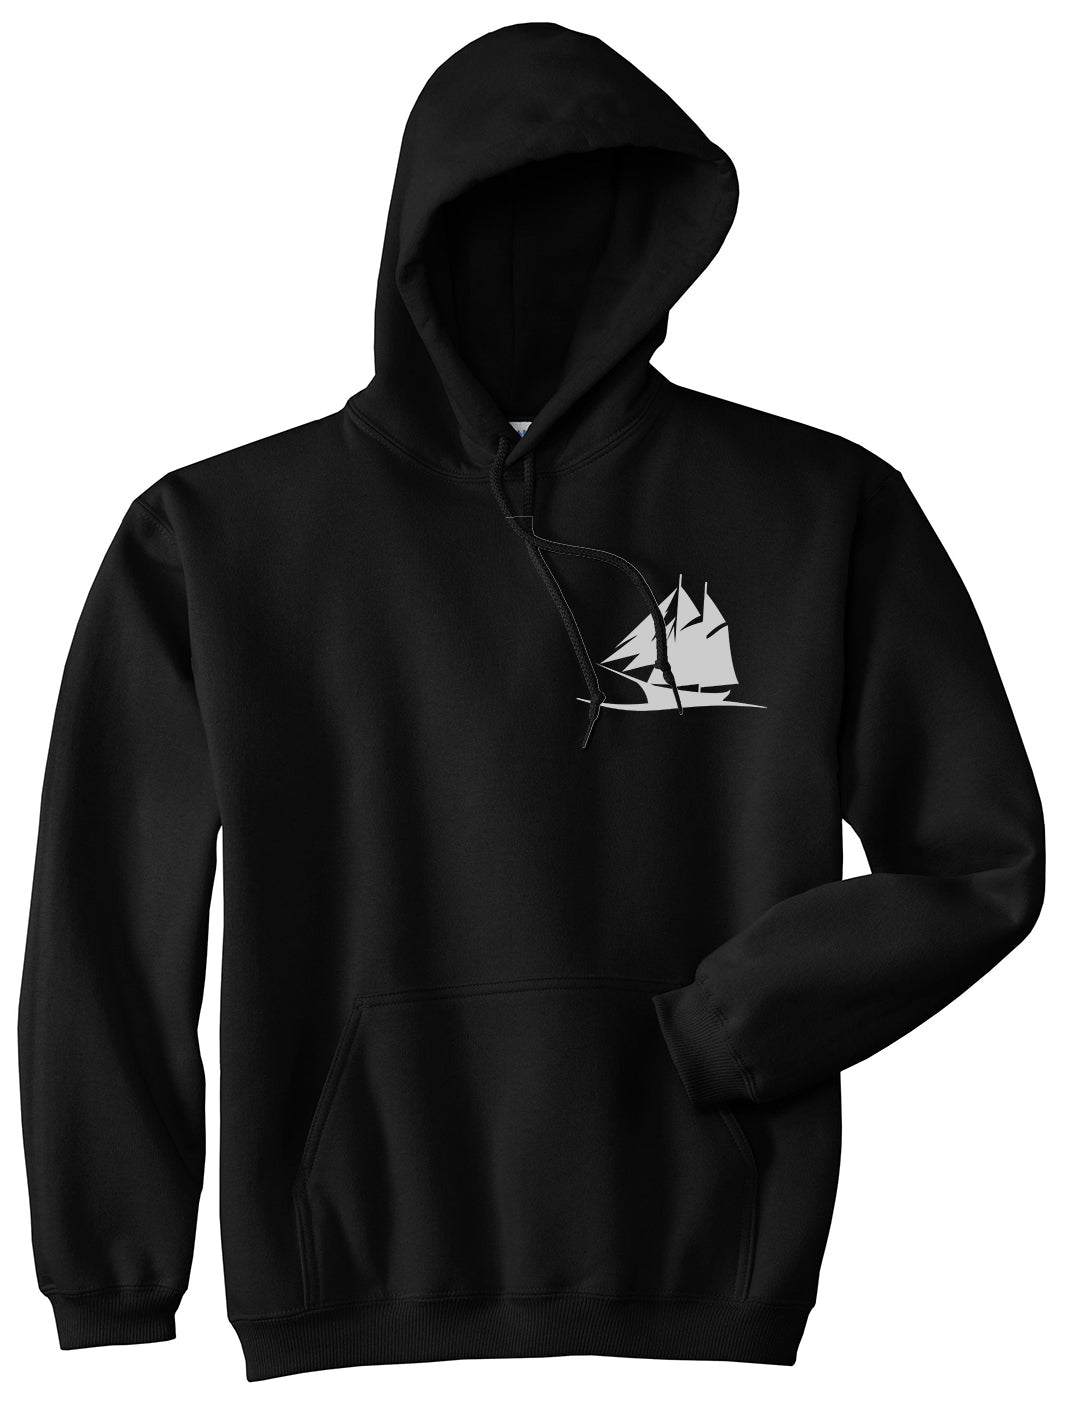 Pirate Ship Chest Black Pullover Hoodie by Kings Of NY